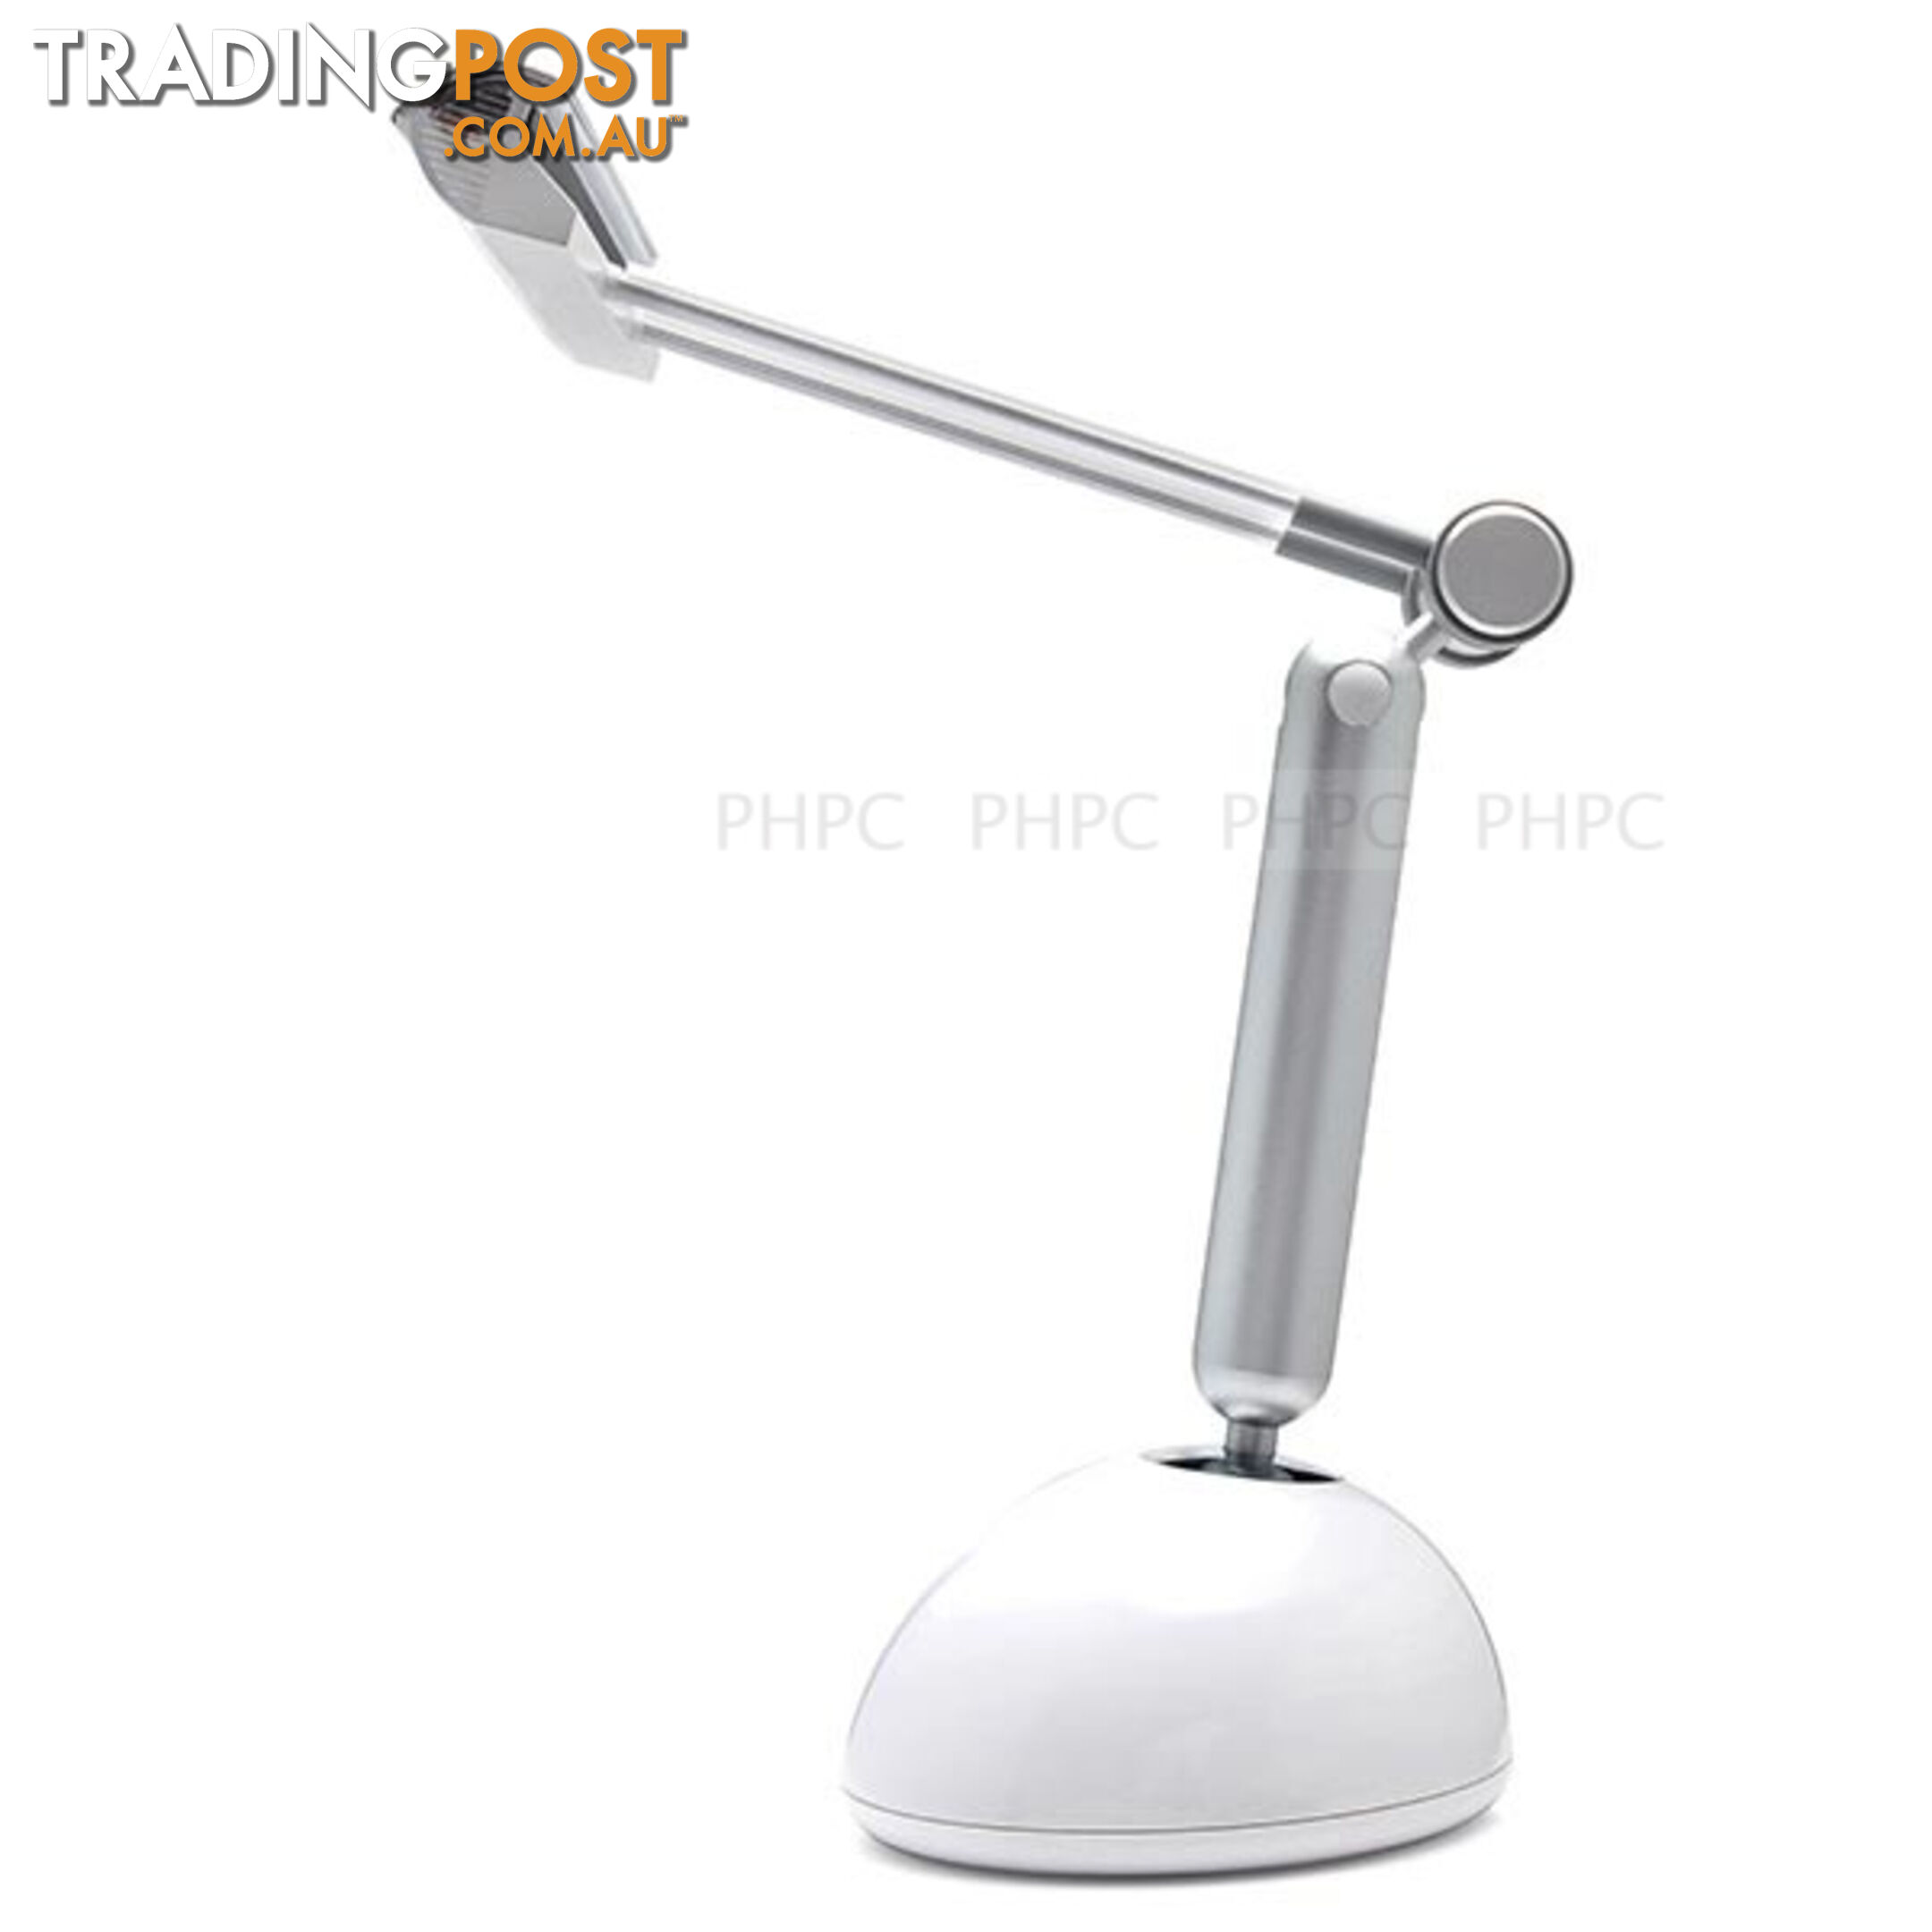 Hydance Deluxe Tablet Stand with LED Light